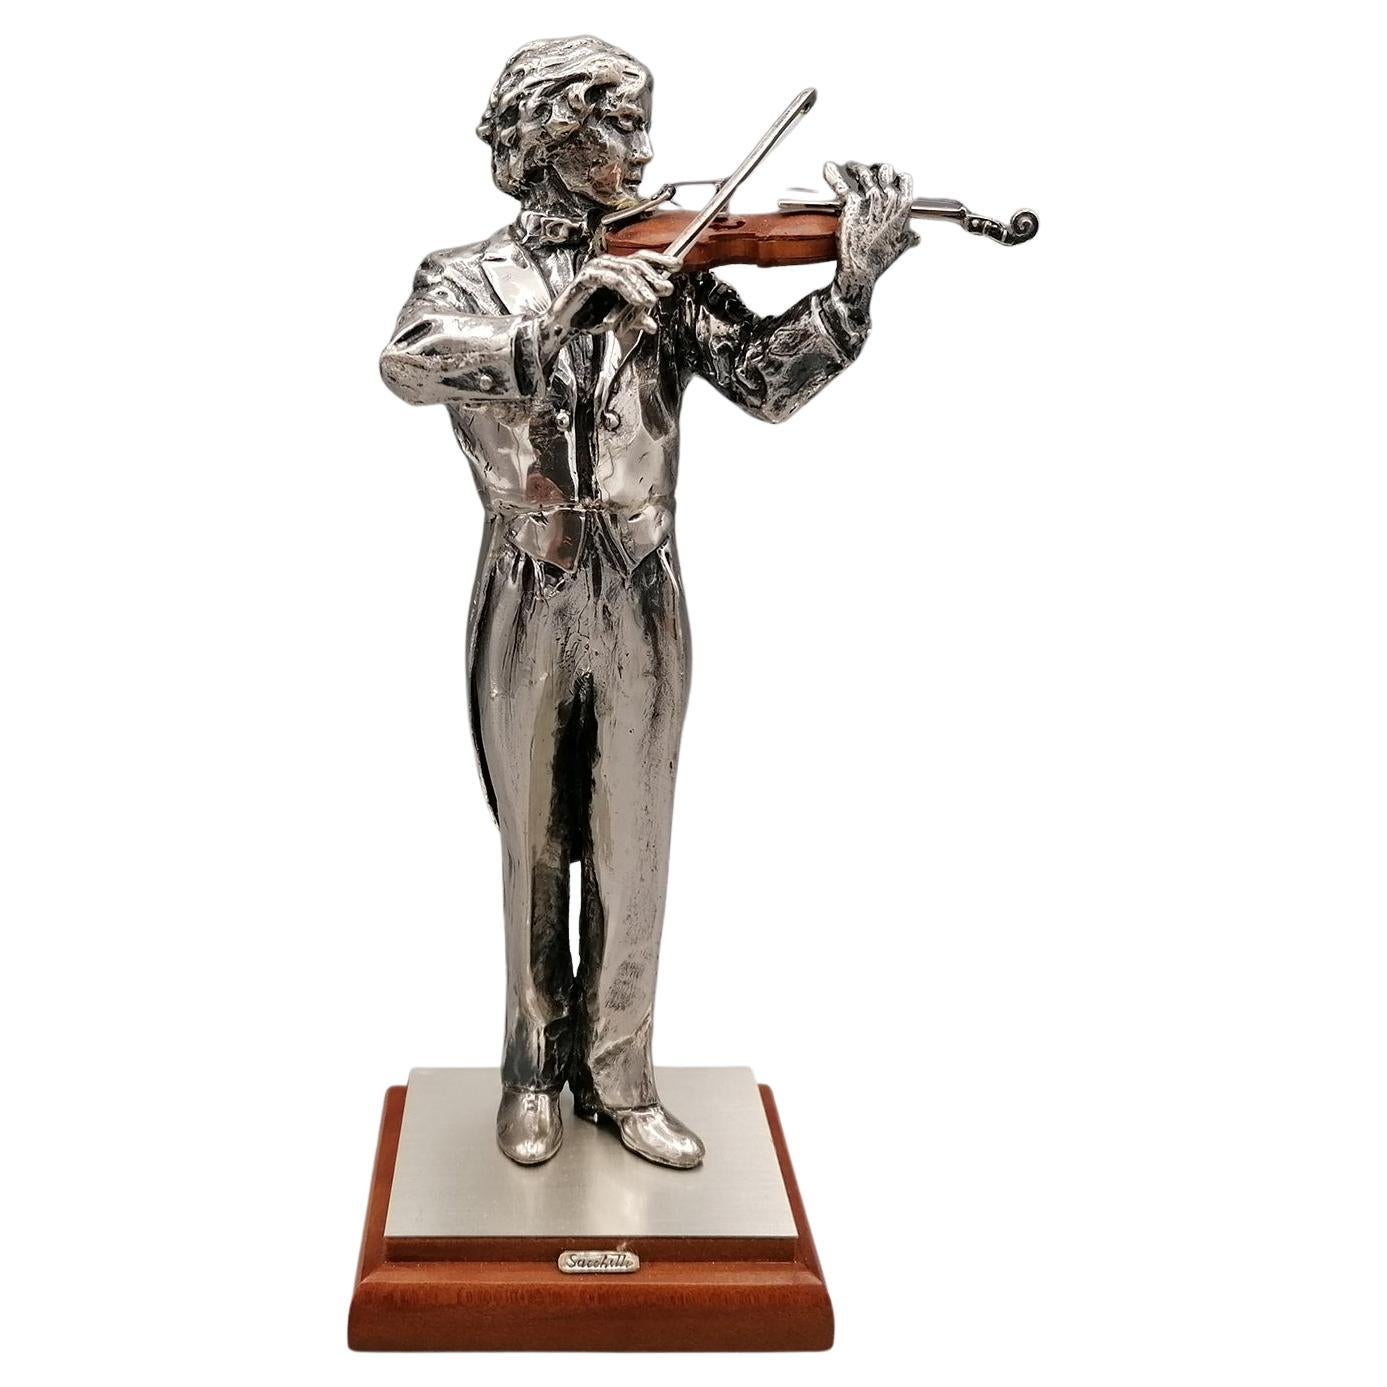 2oth Century Italian Solid Silver Violinist statue with wooden violin For Sale